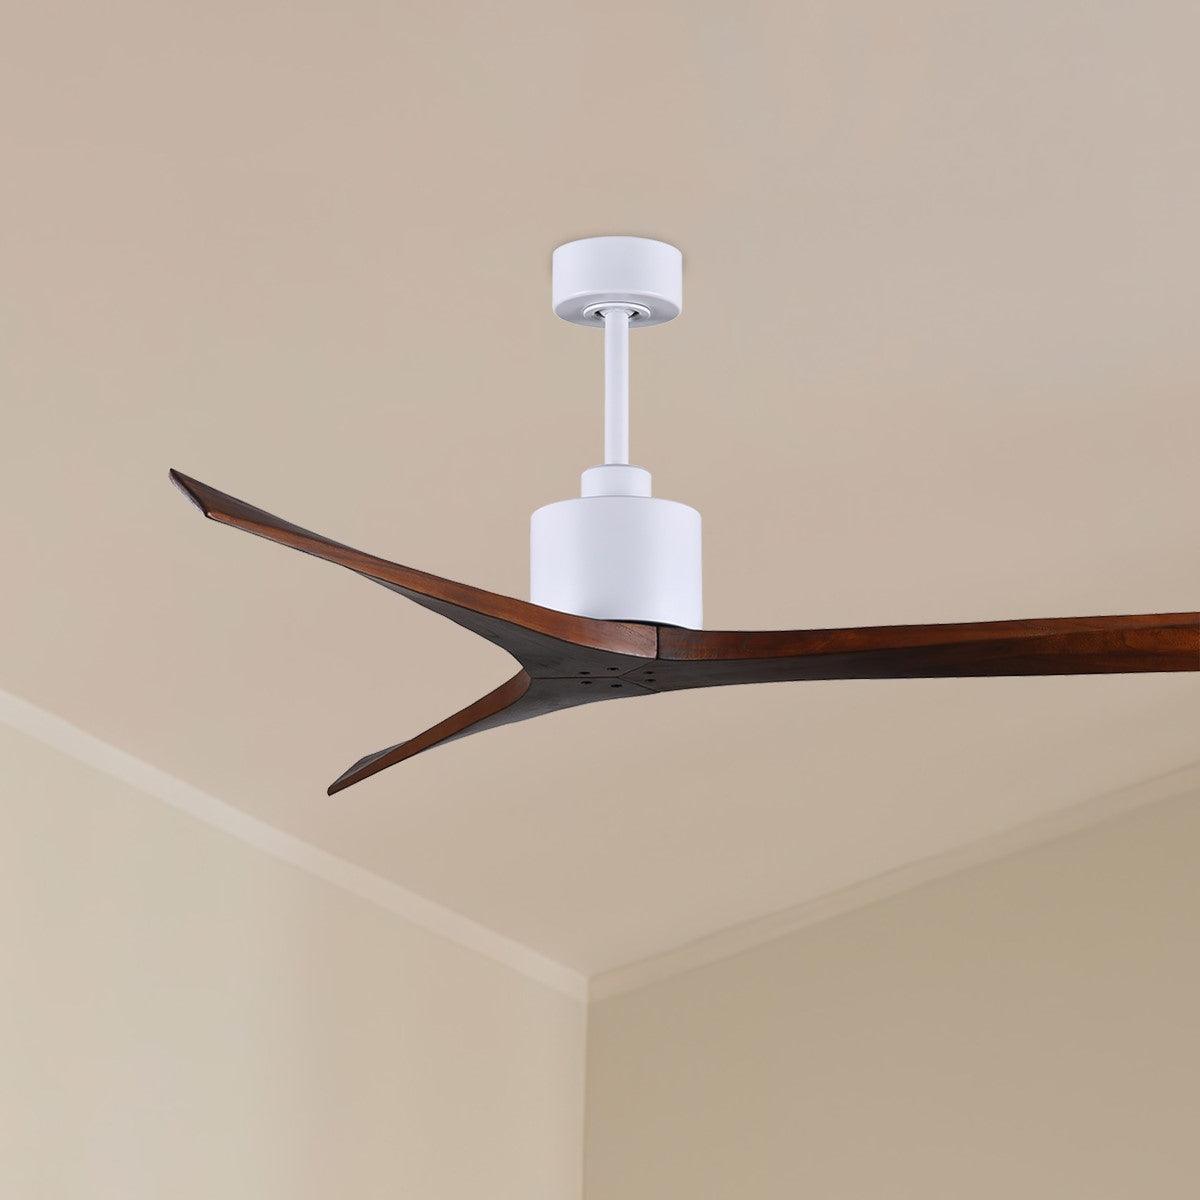 Mollywood 60 Inch Propeller Outdoor Ceiling Fan With Remote And Wall Control